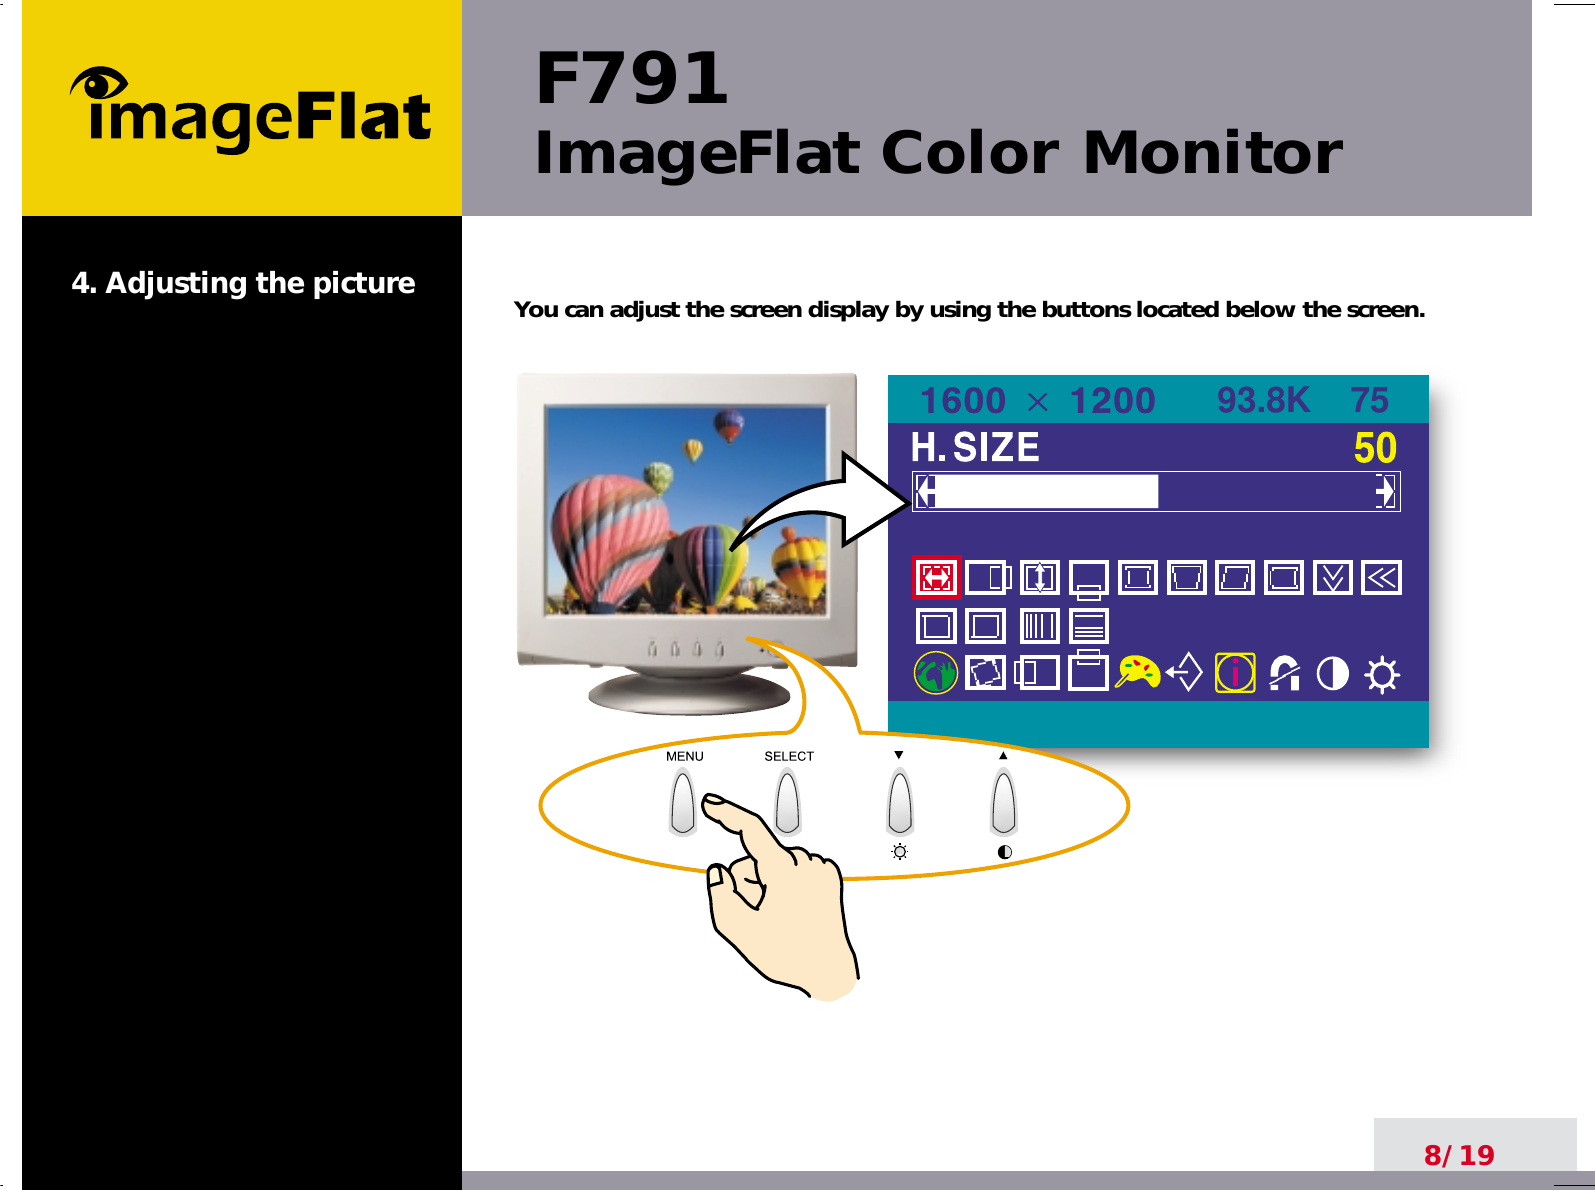 F791ImageFlat Color Monitor8/194. Adjusting the picture You can adjust the screen display by using the buttons located below the screen.93.8K    75